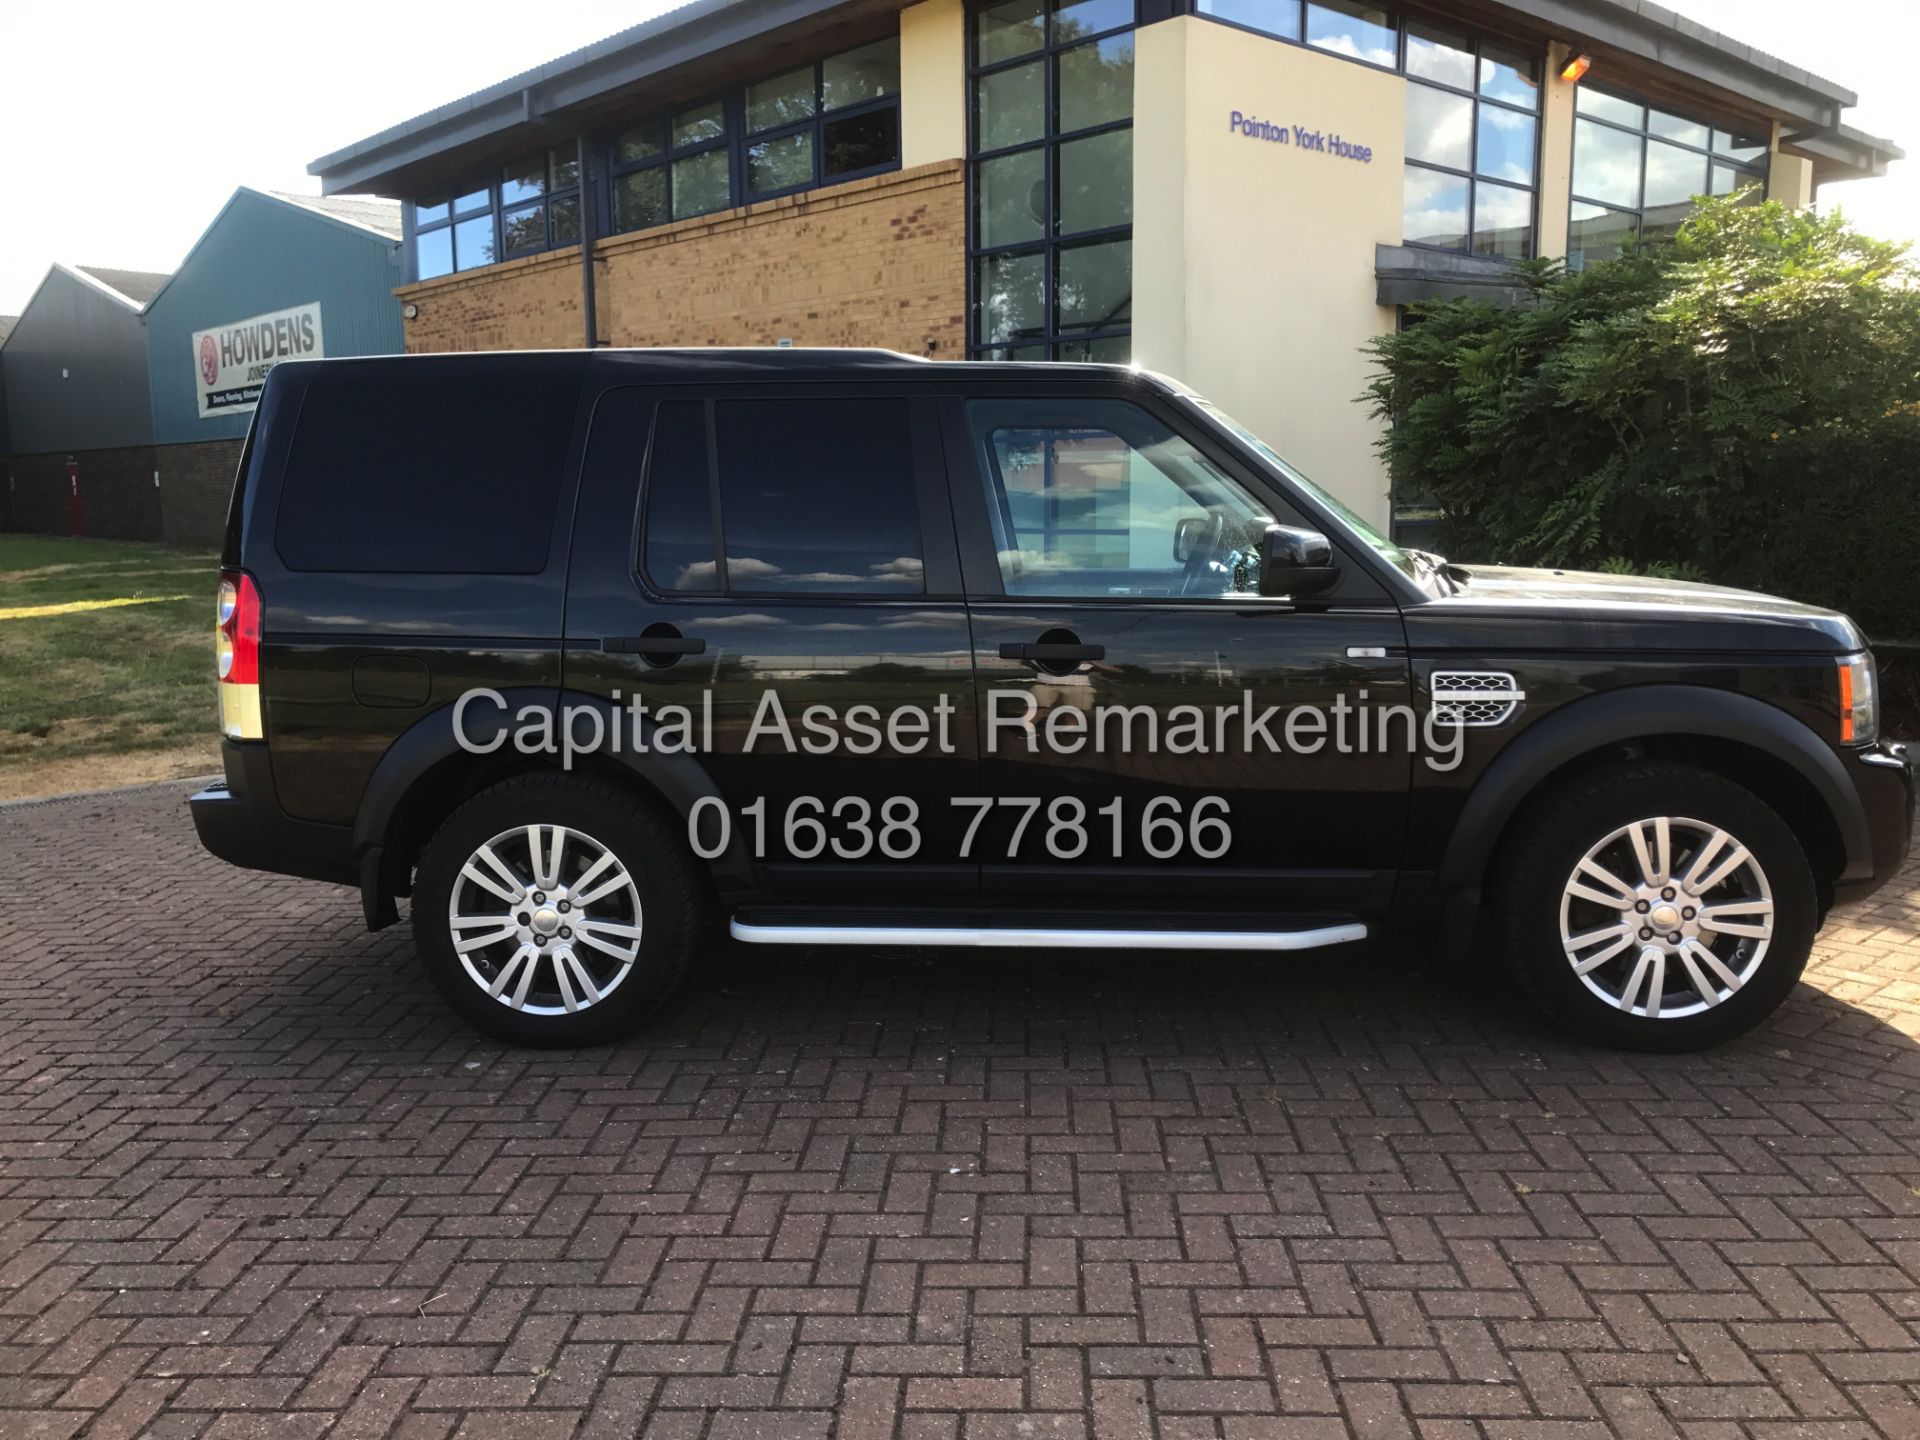 ON SALE LAND ROVER DISCOVERY 4 "3.0SDV6 - AUTO"COMMERCIAL (2014 MODEL) HUGE SPEC - SAT NAV -LEATHER - Image 11 of 31